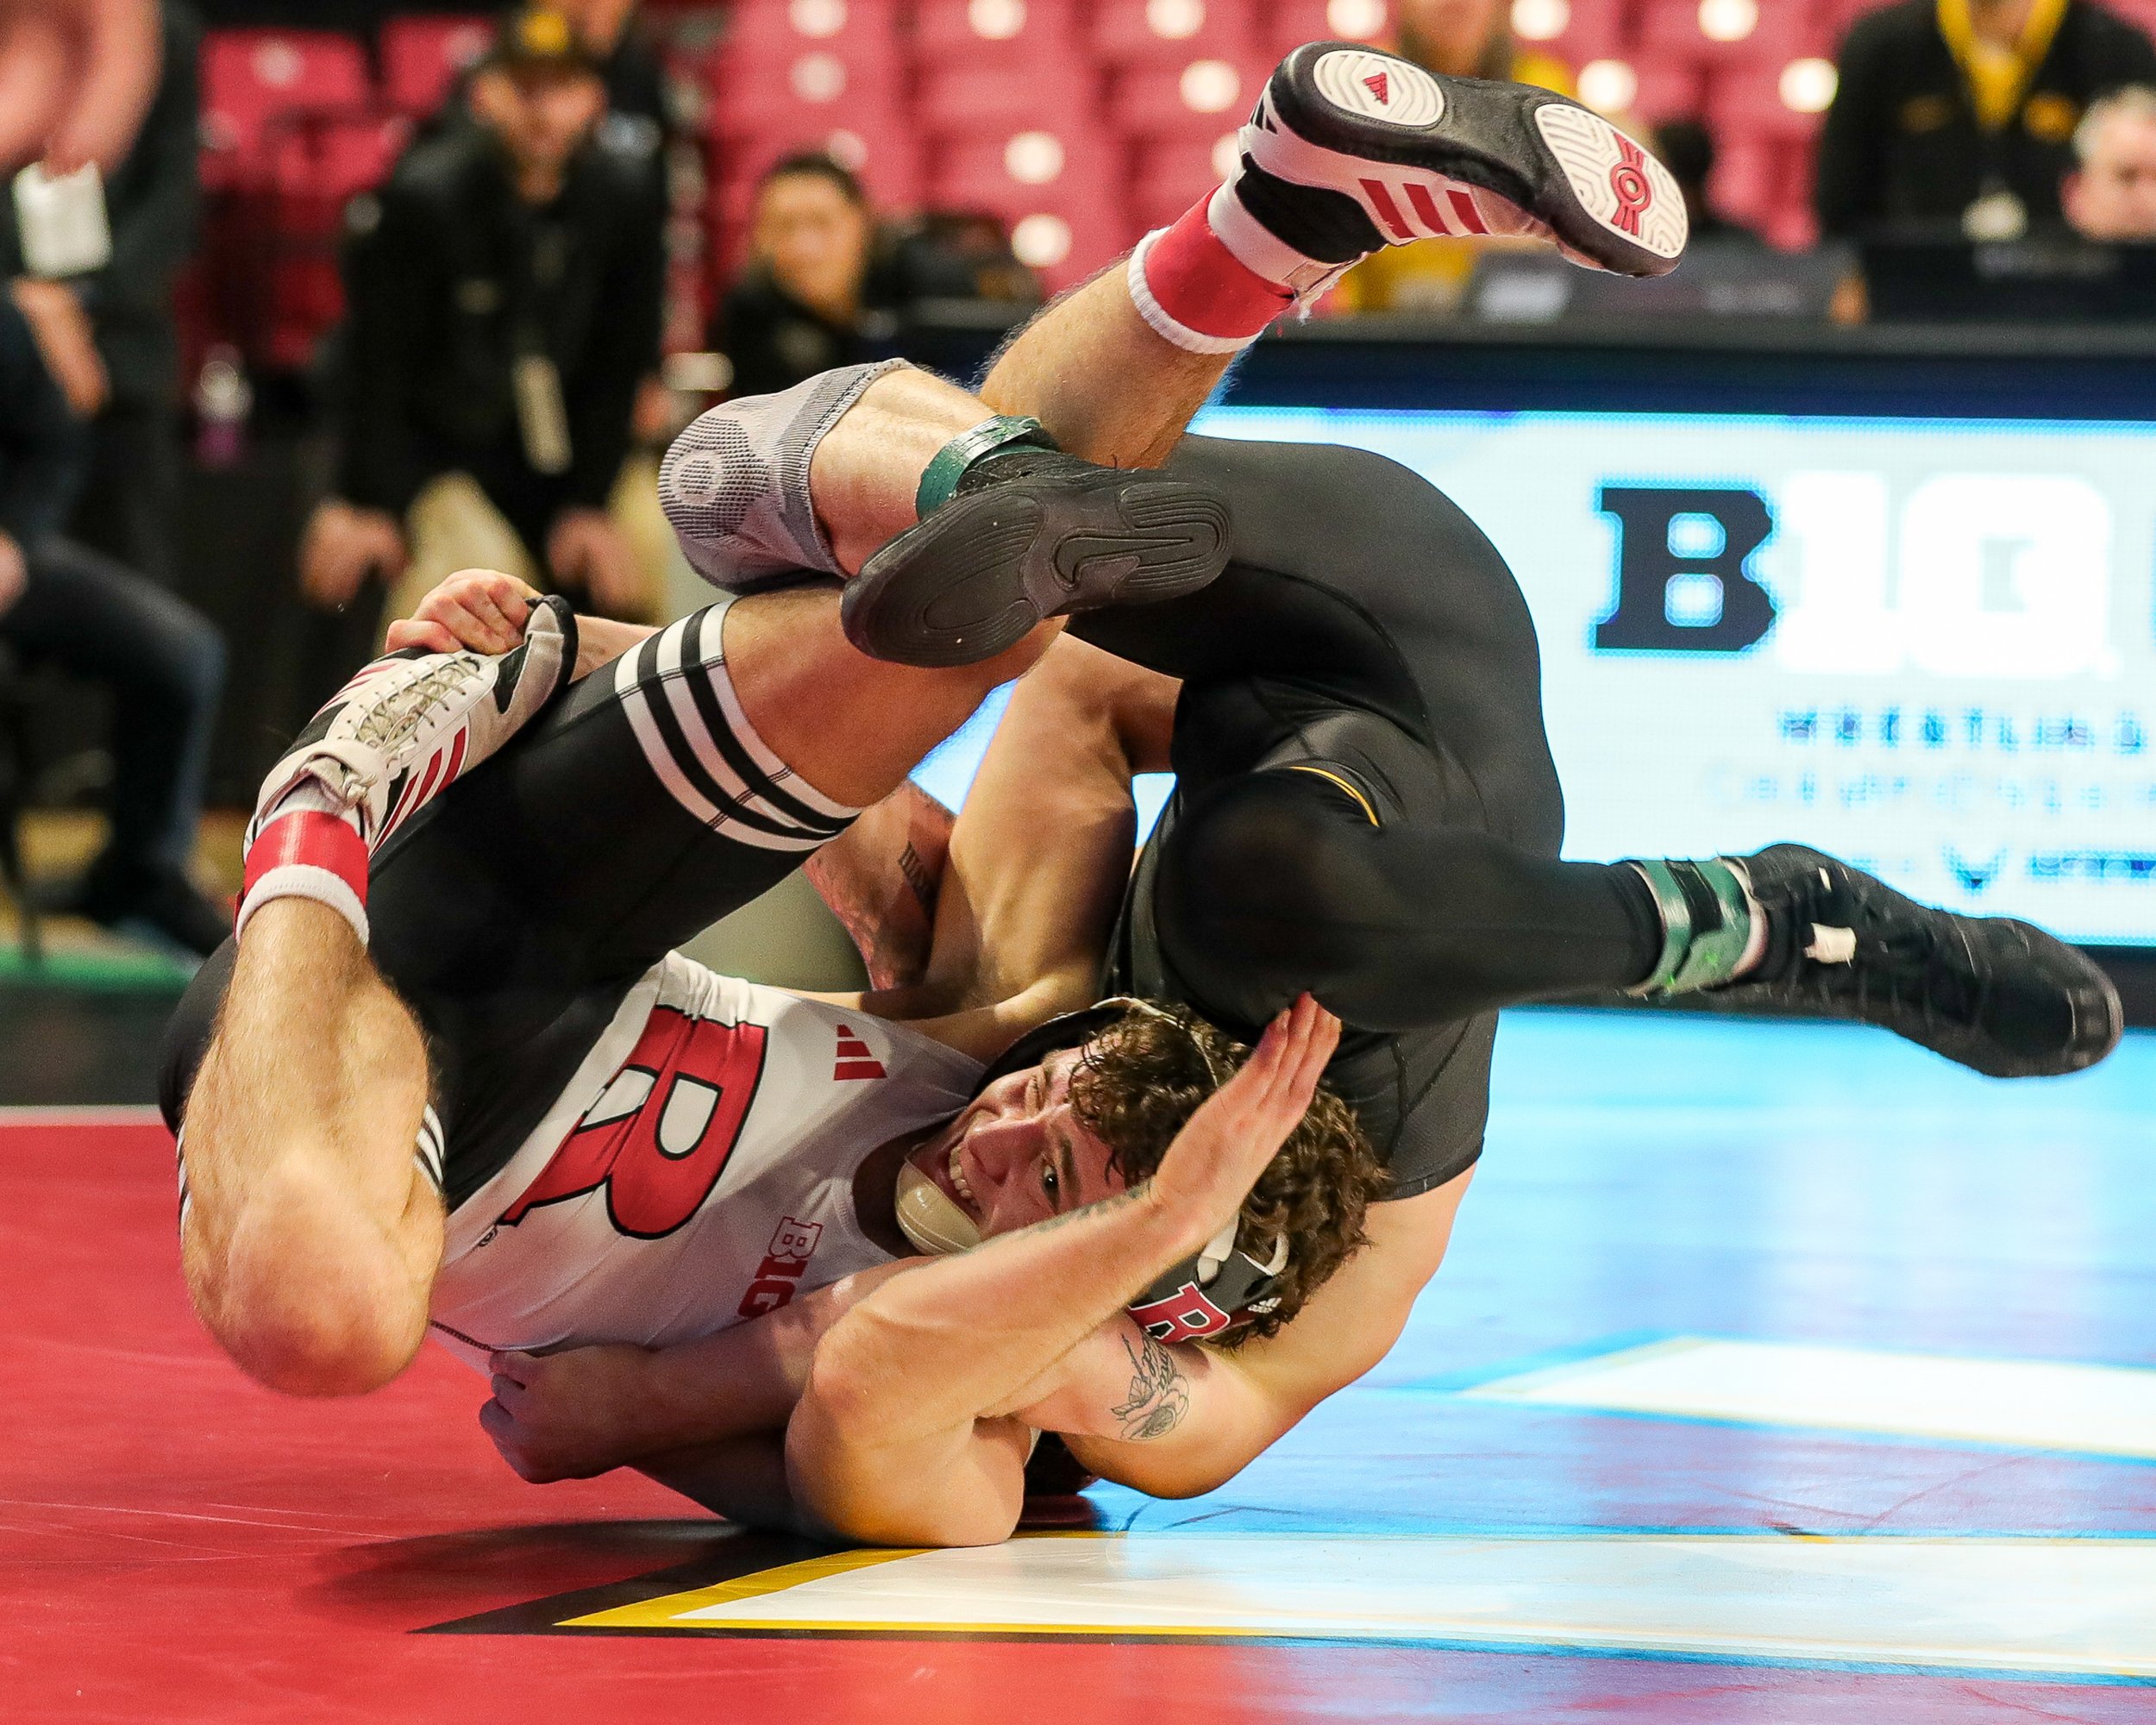  Iowa wrestler Brody Teske grapples with Rutgers’ Dylan Shawver in a 133-lb semifinal match during the Big Ten Wrestling Championships at the Xfinity Center in College Park, Maryland on Saturday, March 9, 2023. Teske lost 12-6. (David Harmantas/For t